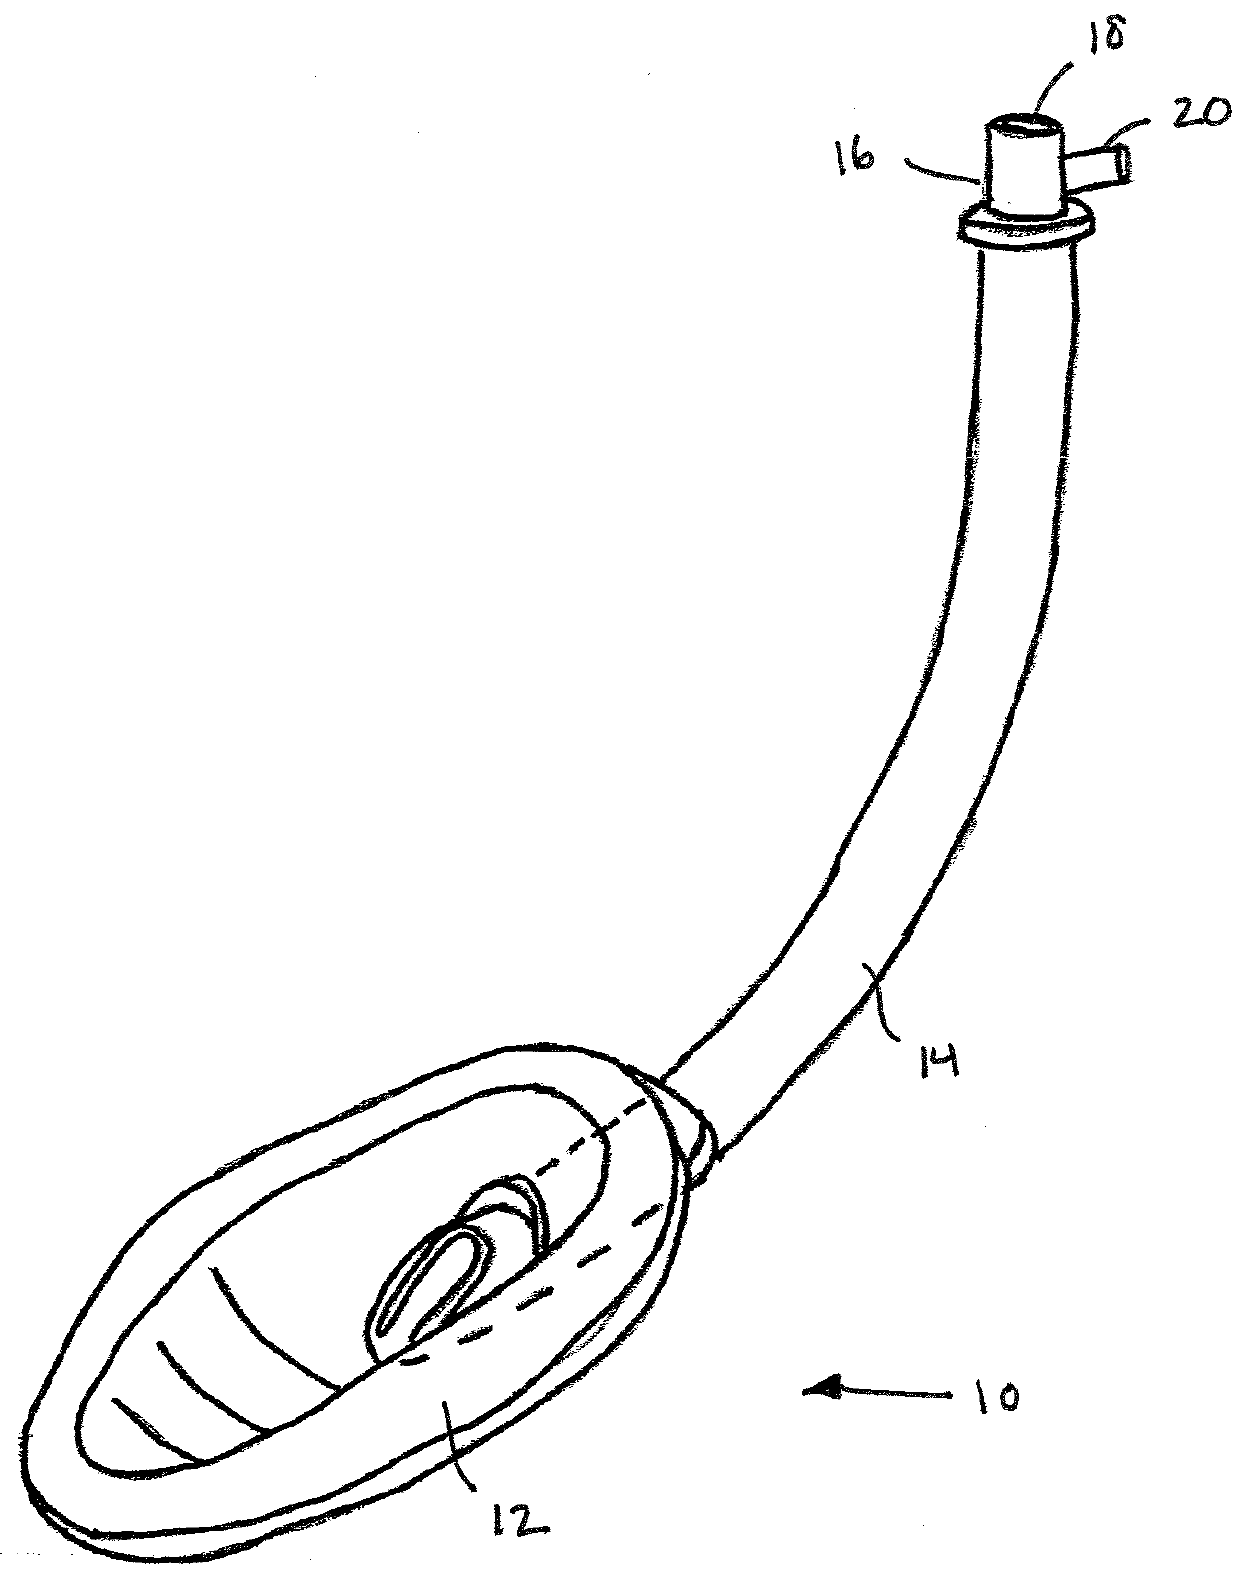 Apparatus, system, and method for endotracheal tube placement